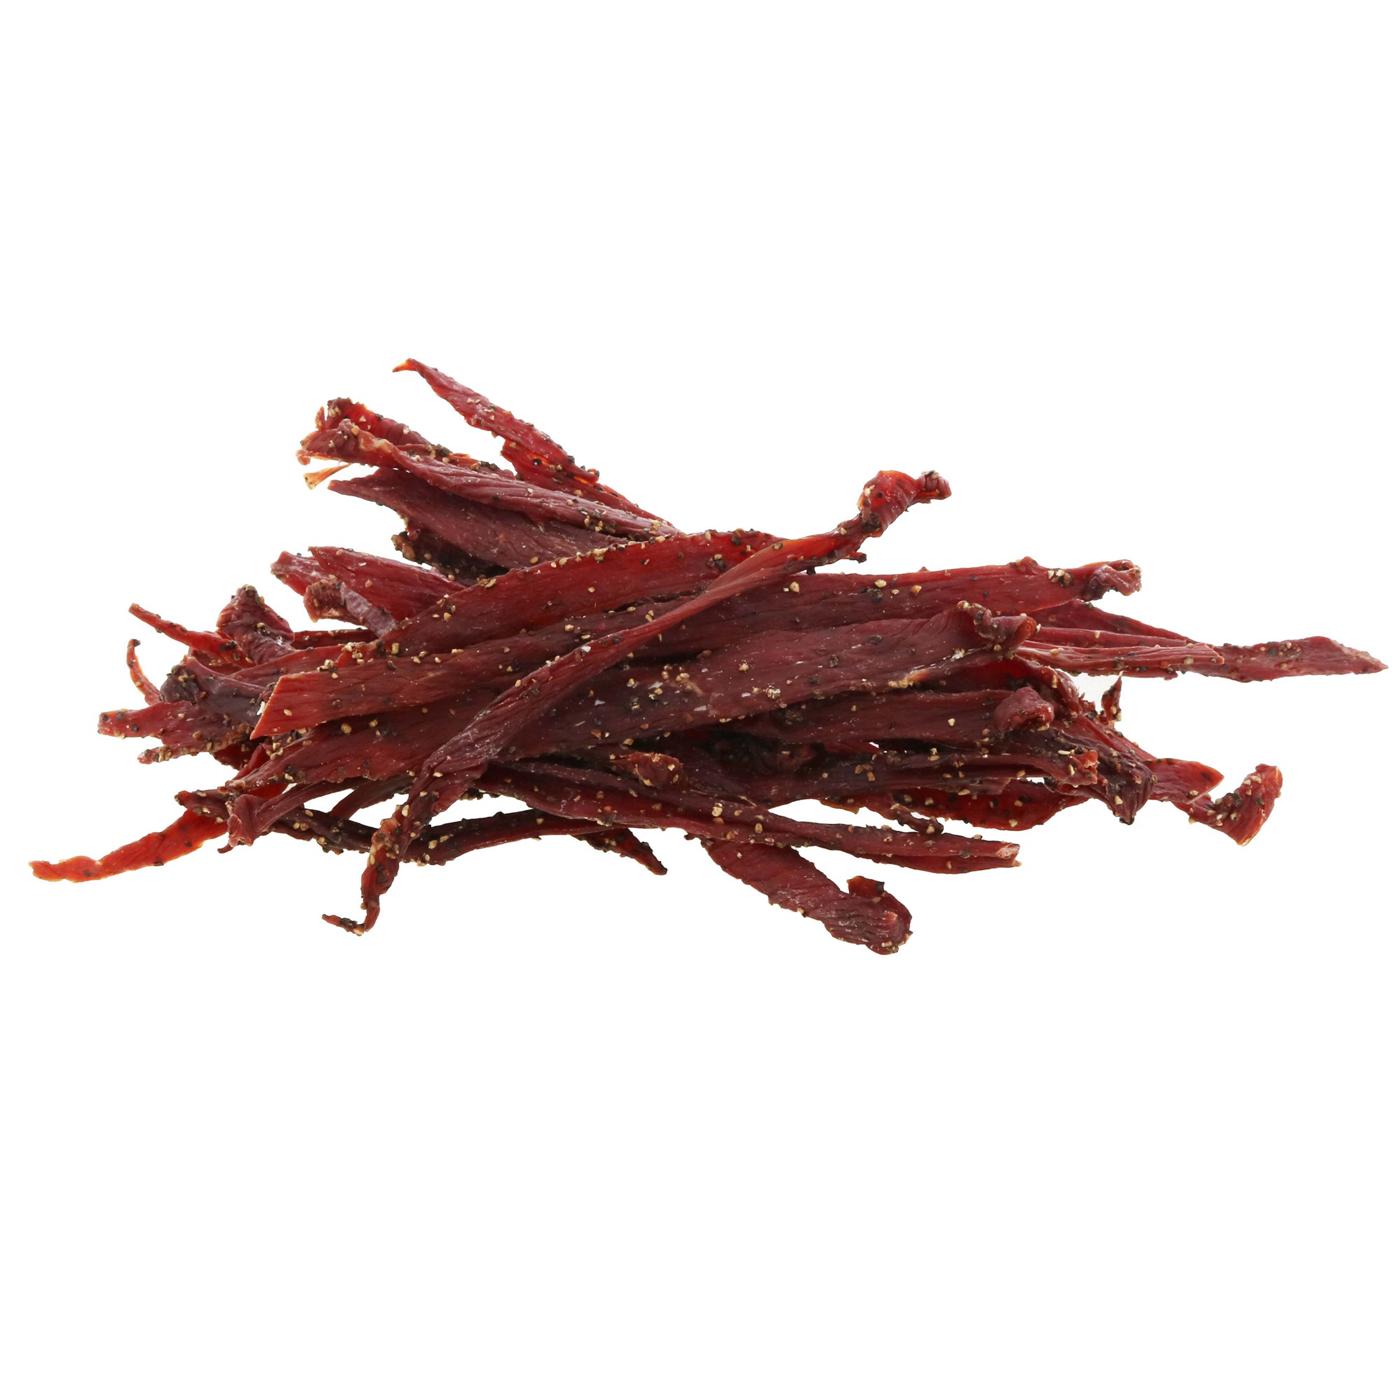 Prasek's Peppered Beef Jerky Thin Cut; image 1 of 2